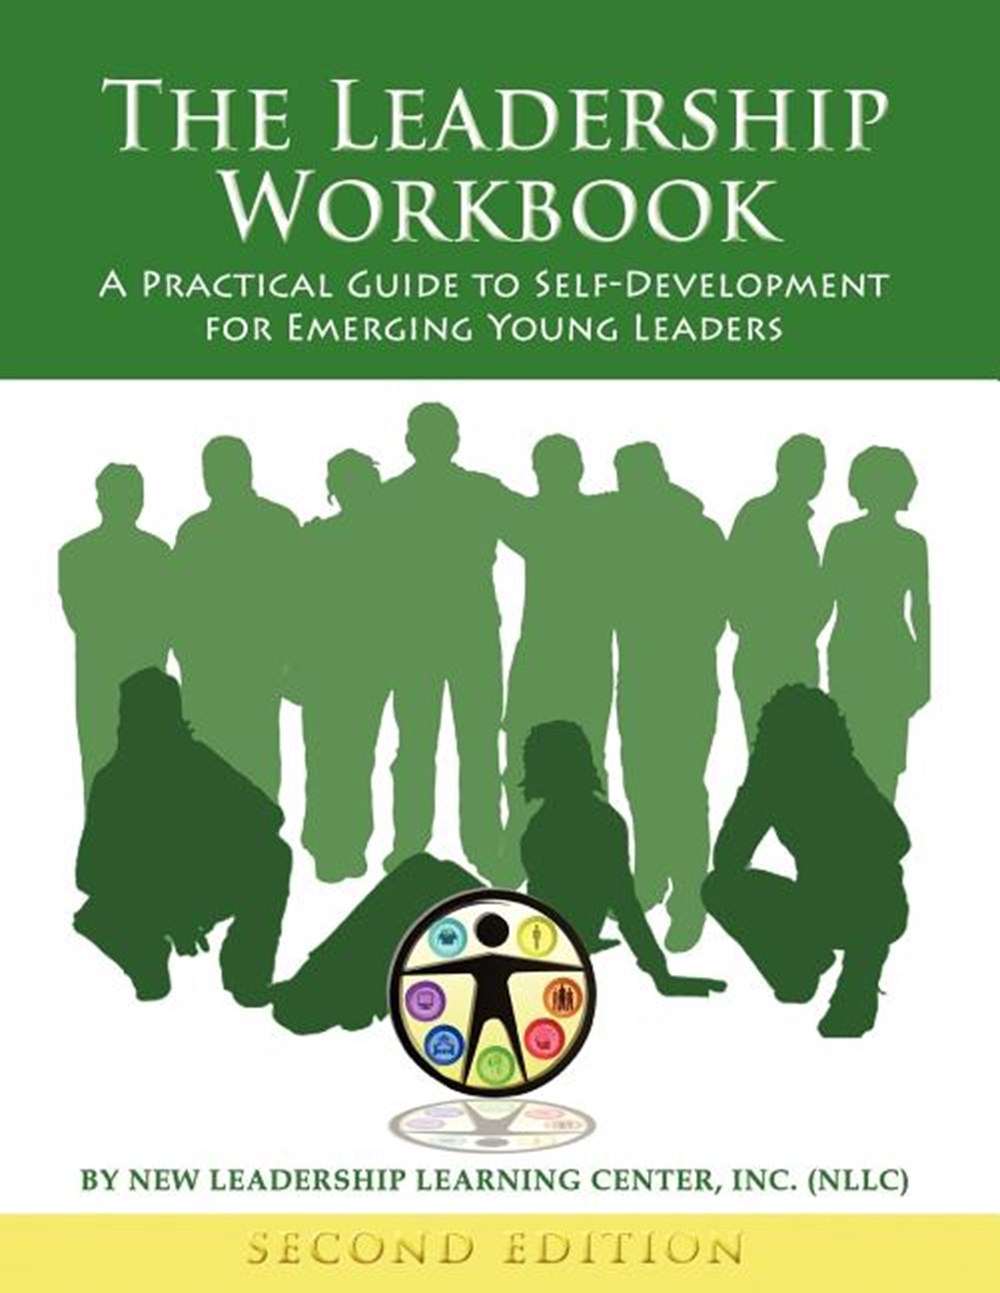 Leadership Workbook: A Practical Guide to Self-Development for Emerging Young Leaders